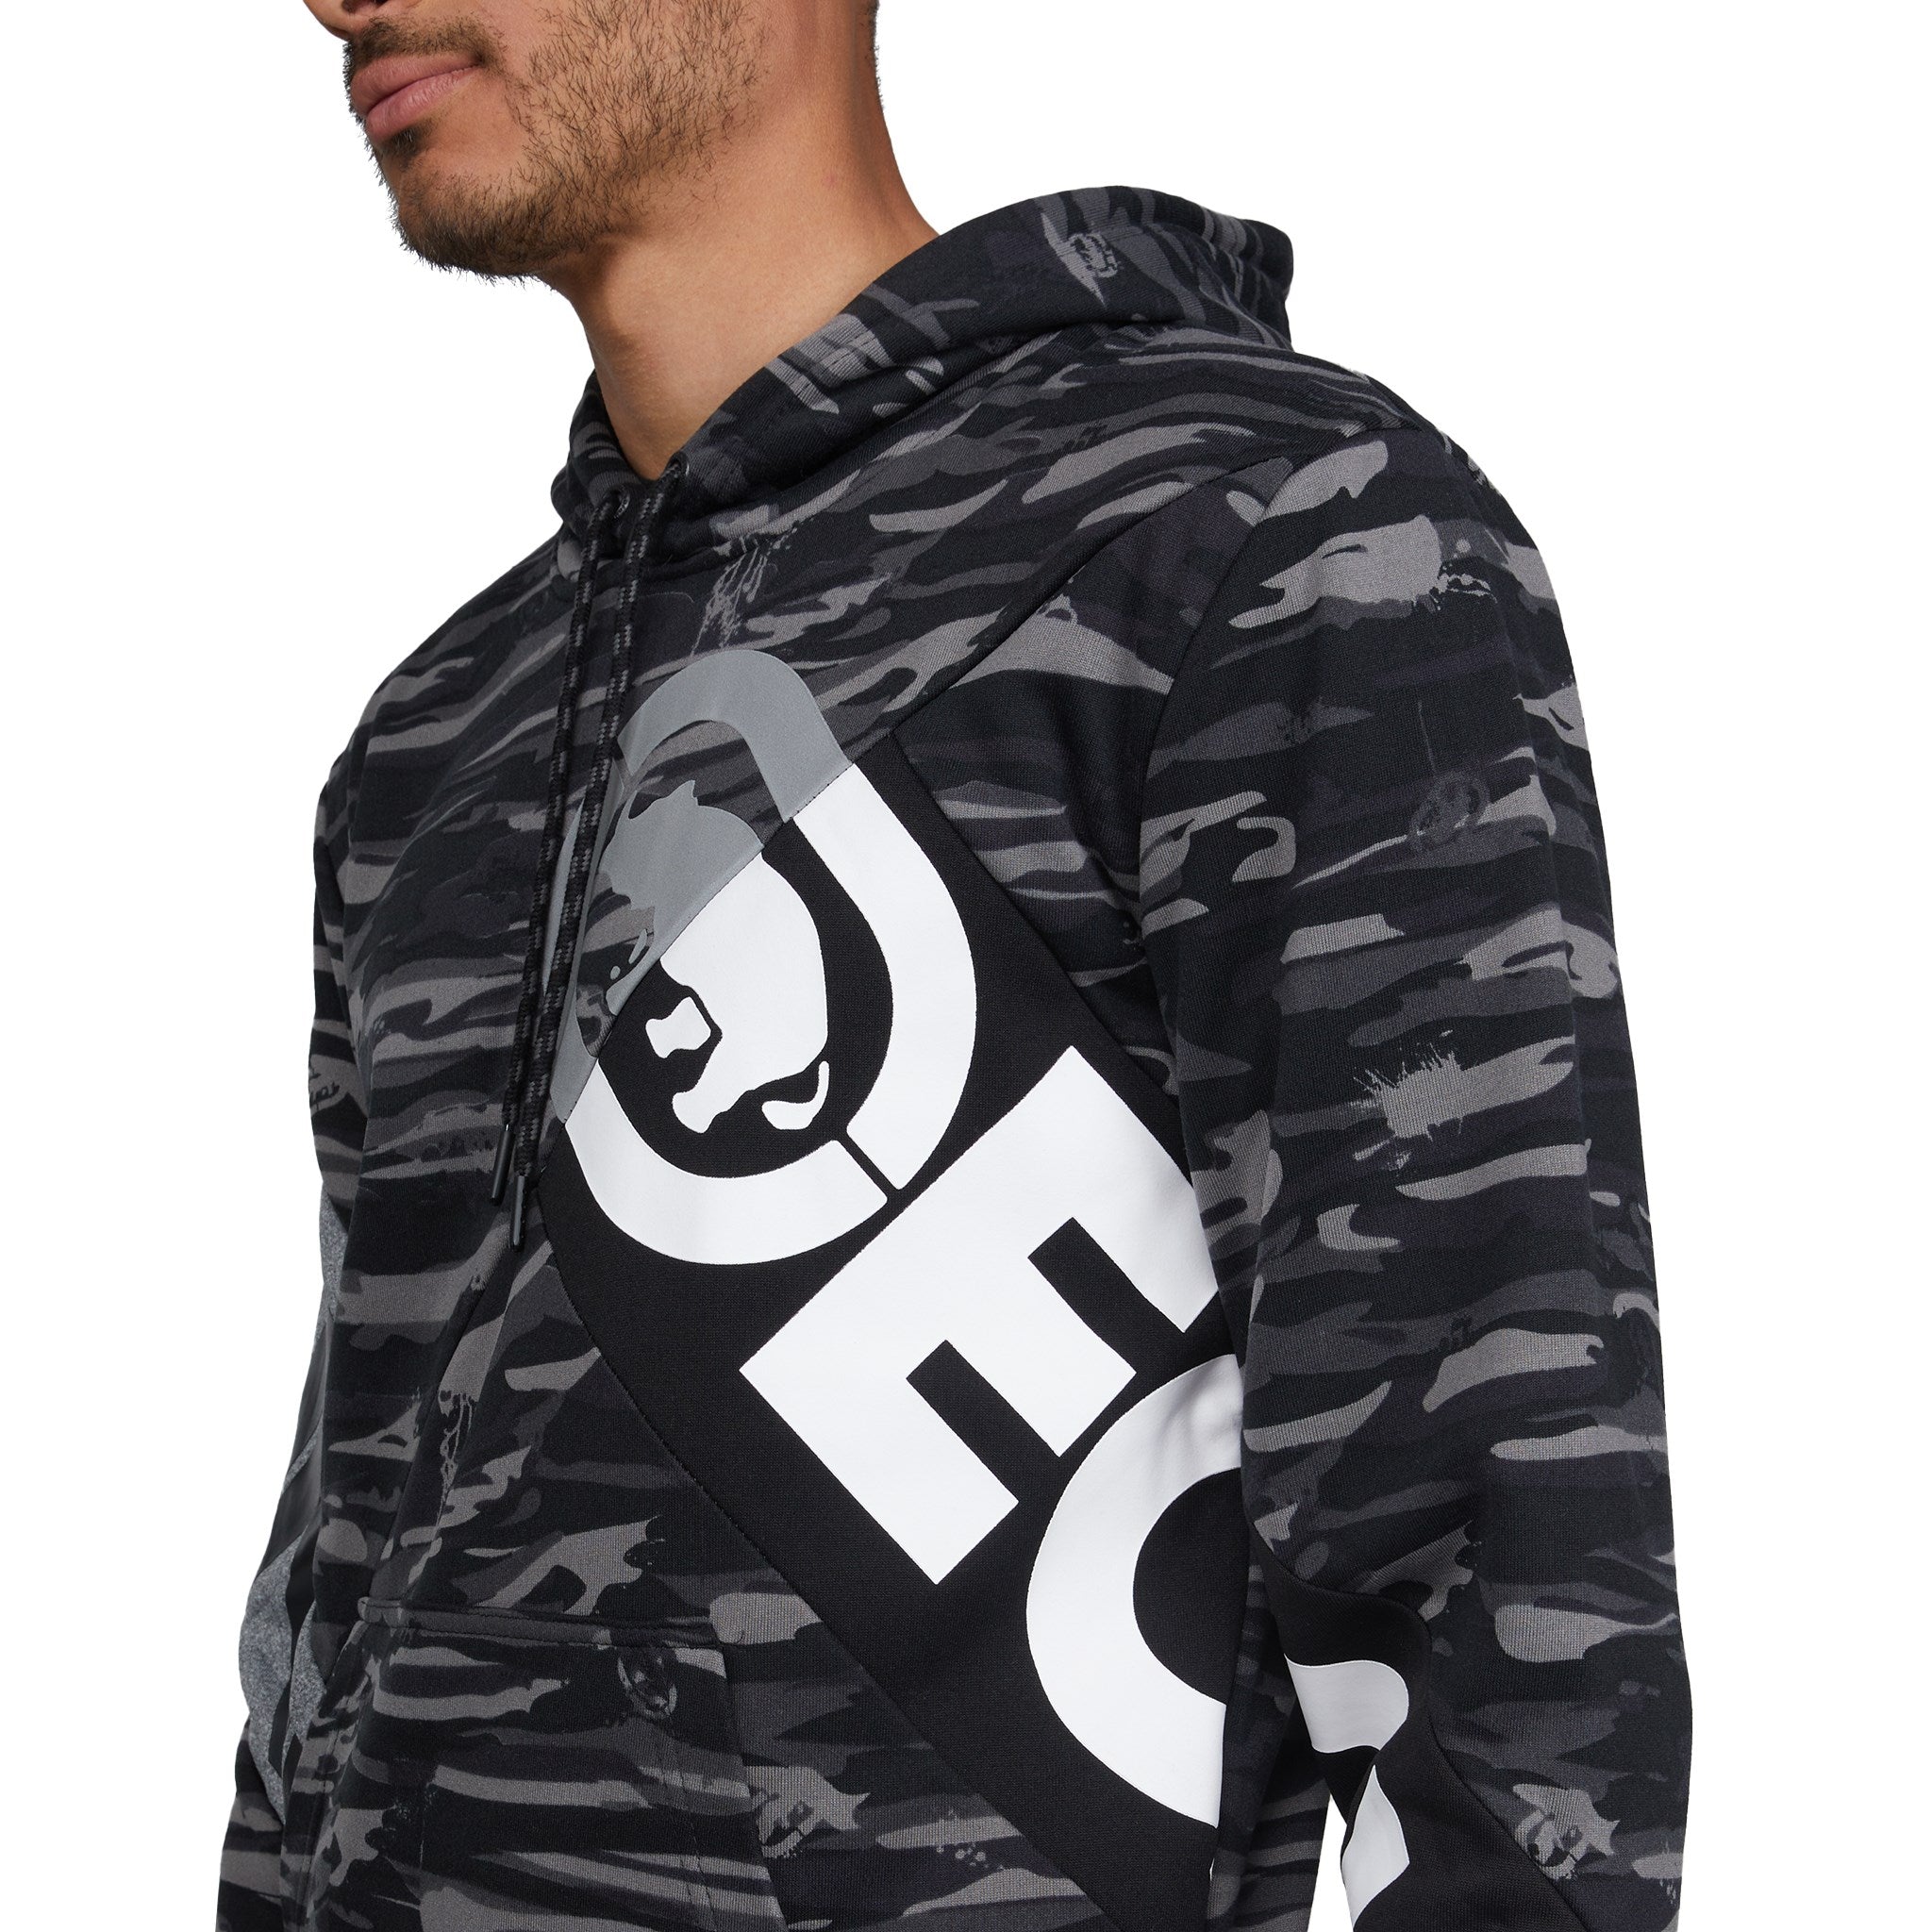 Down Hill Camo Pullover Hoodie